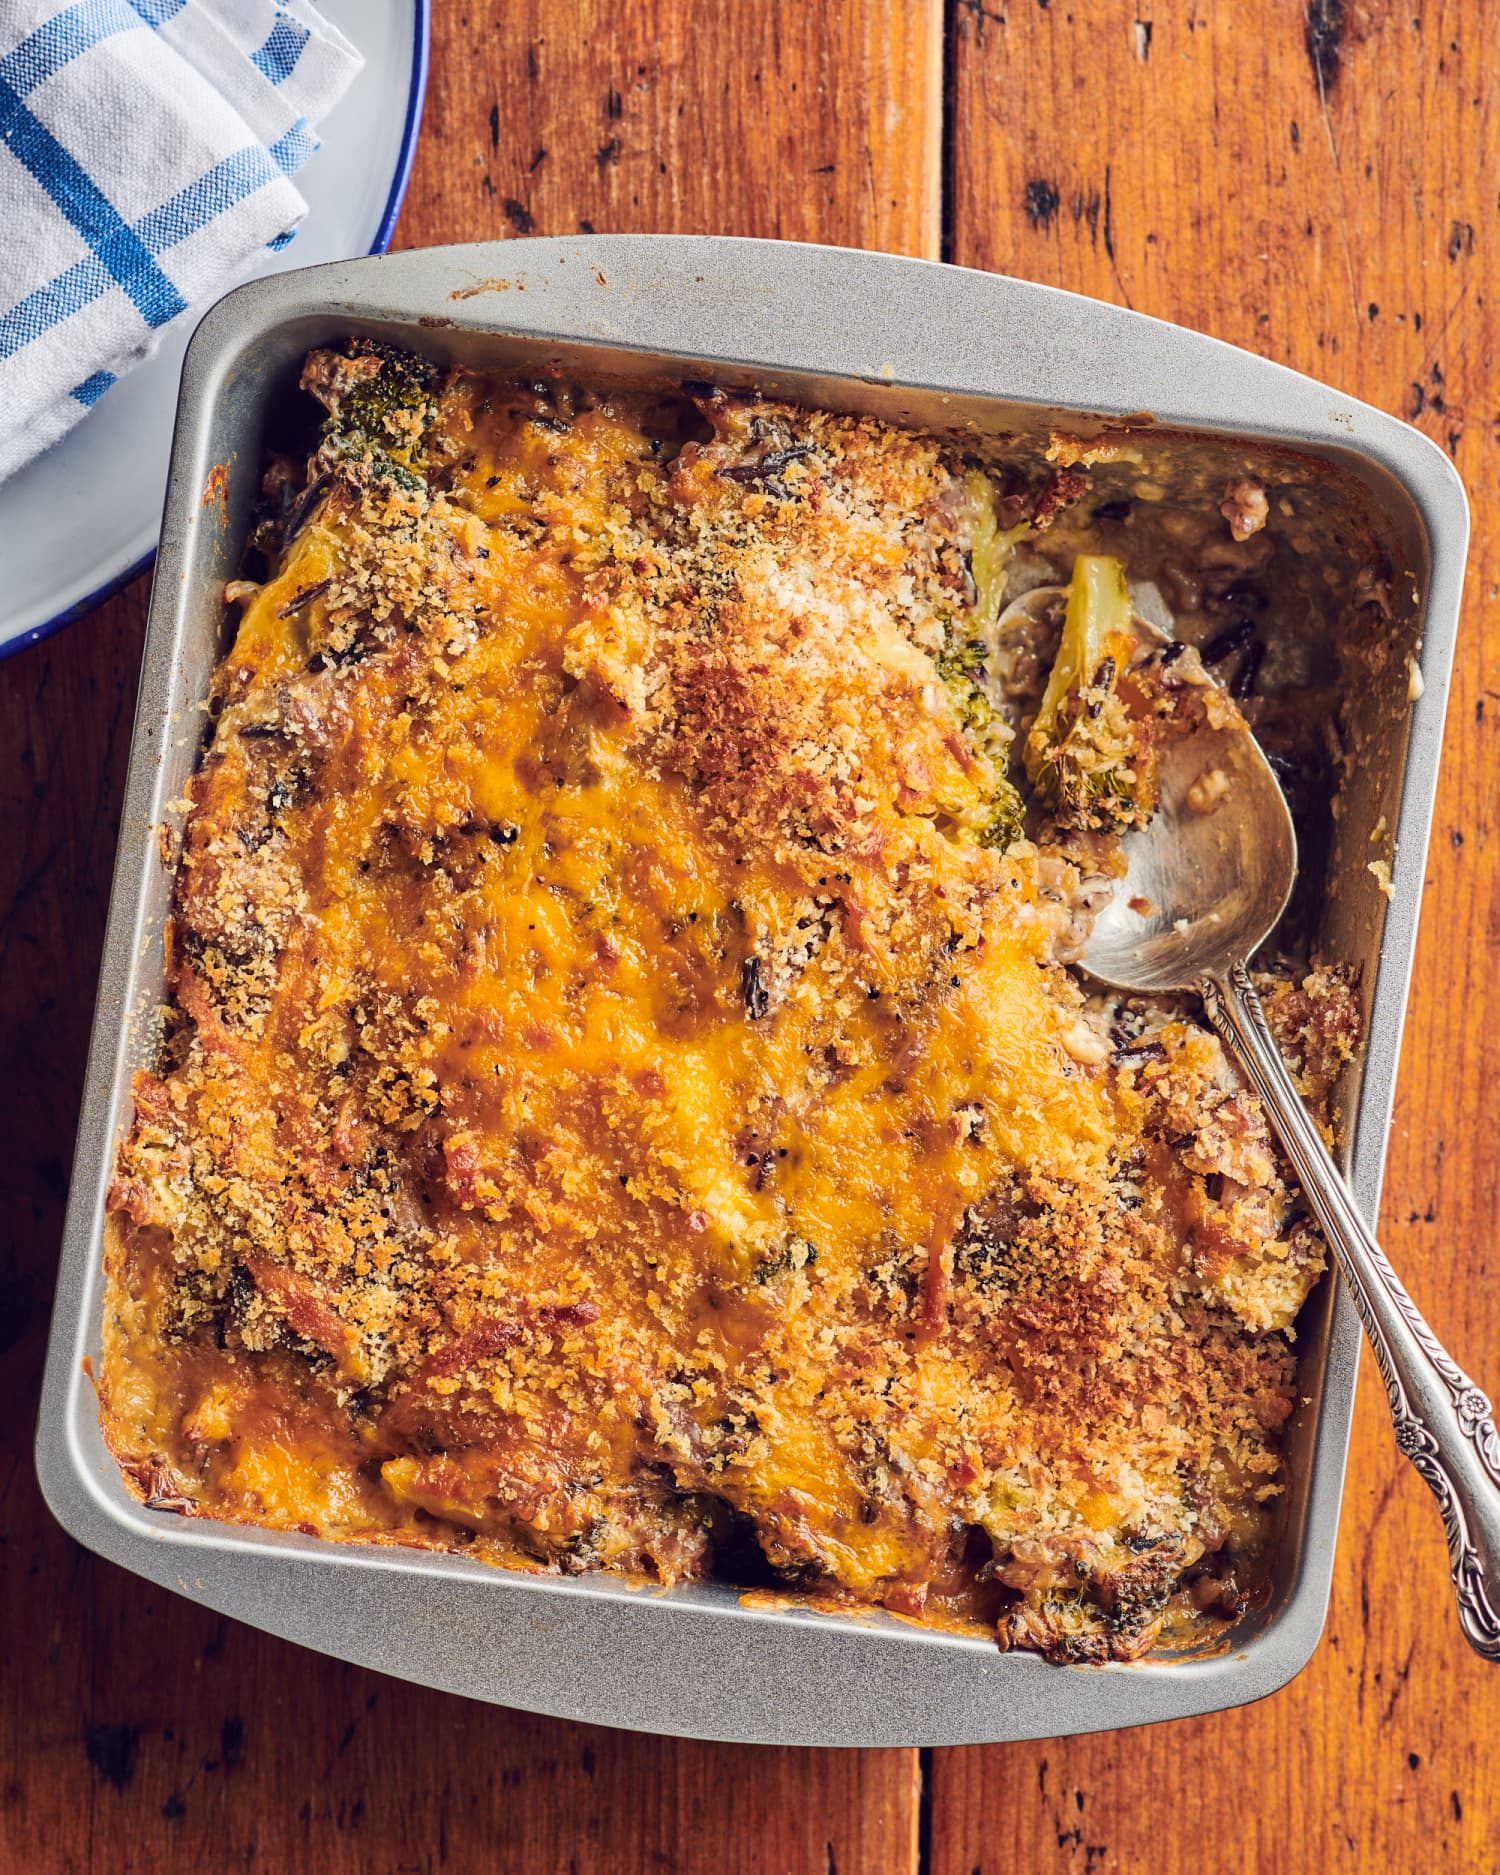 Cheesy Broccoli Rice Casserole Is All the Best Things In One Cozy Dish